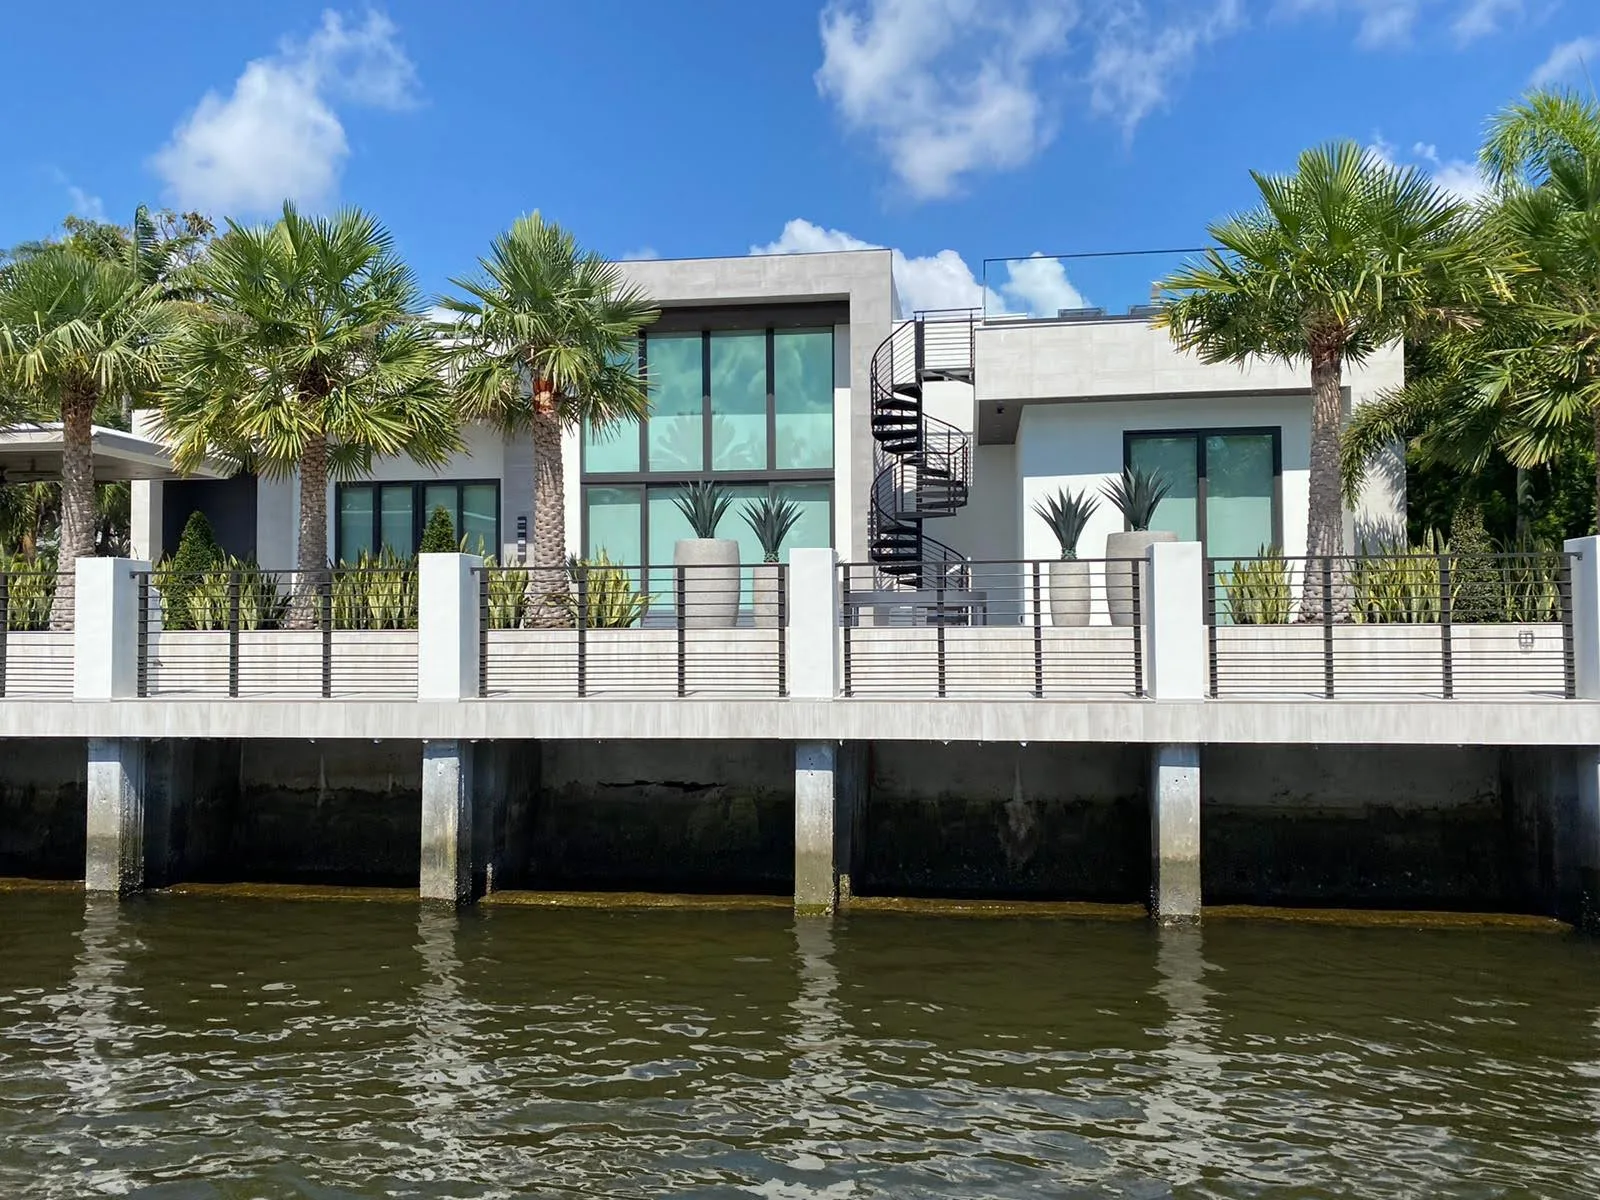 Finished Dock And Pilings: Fort Lauderdale